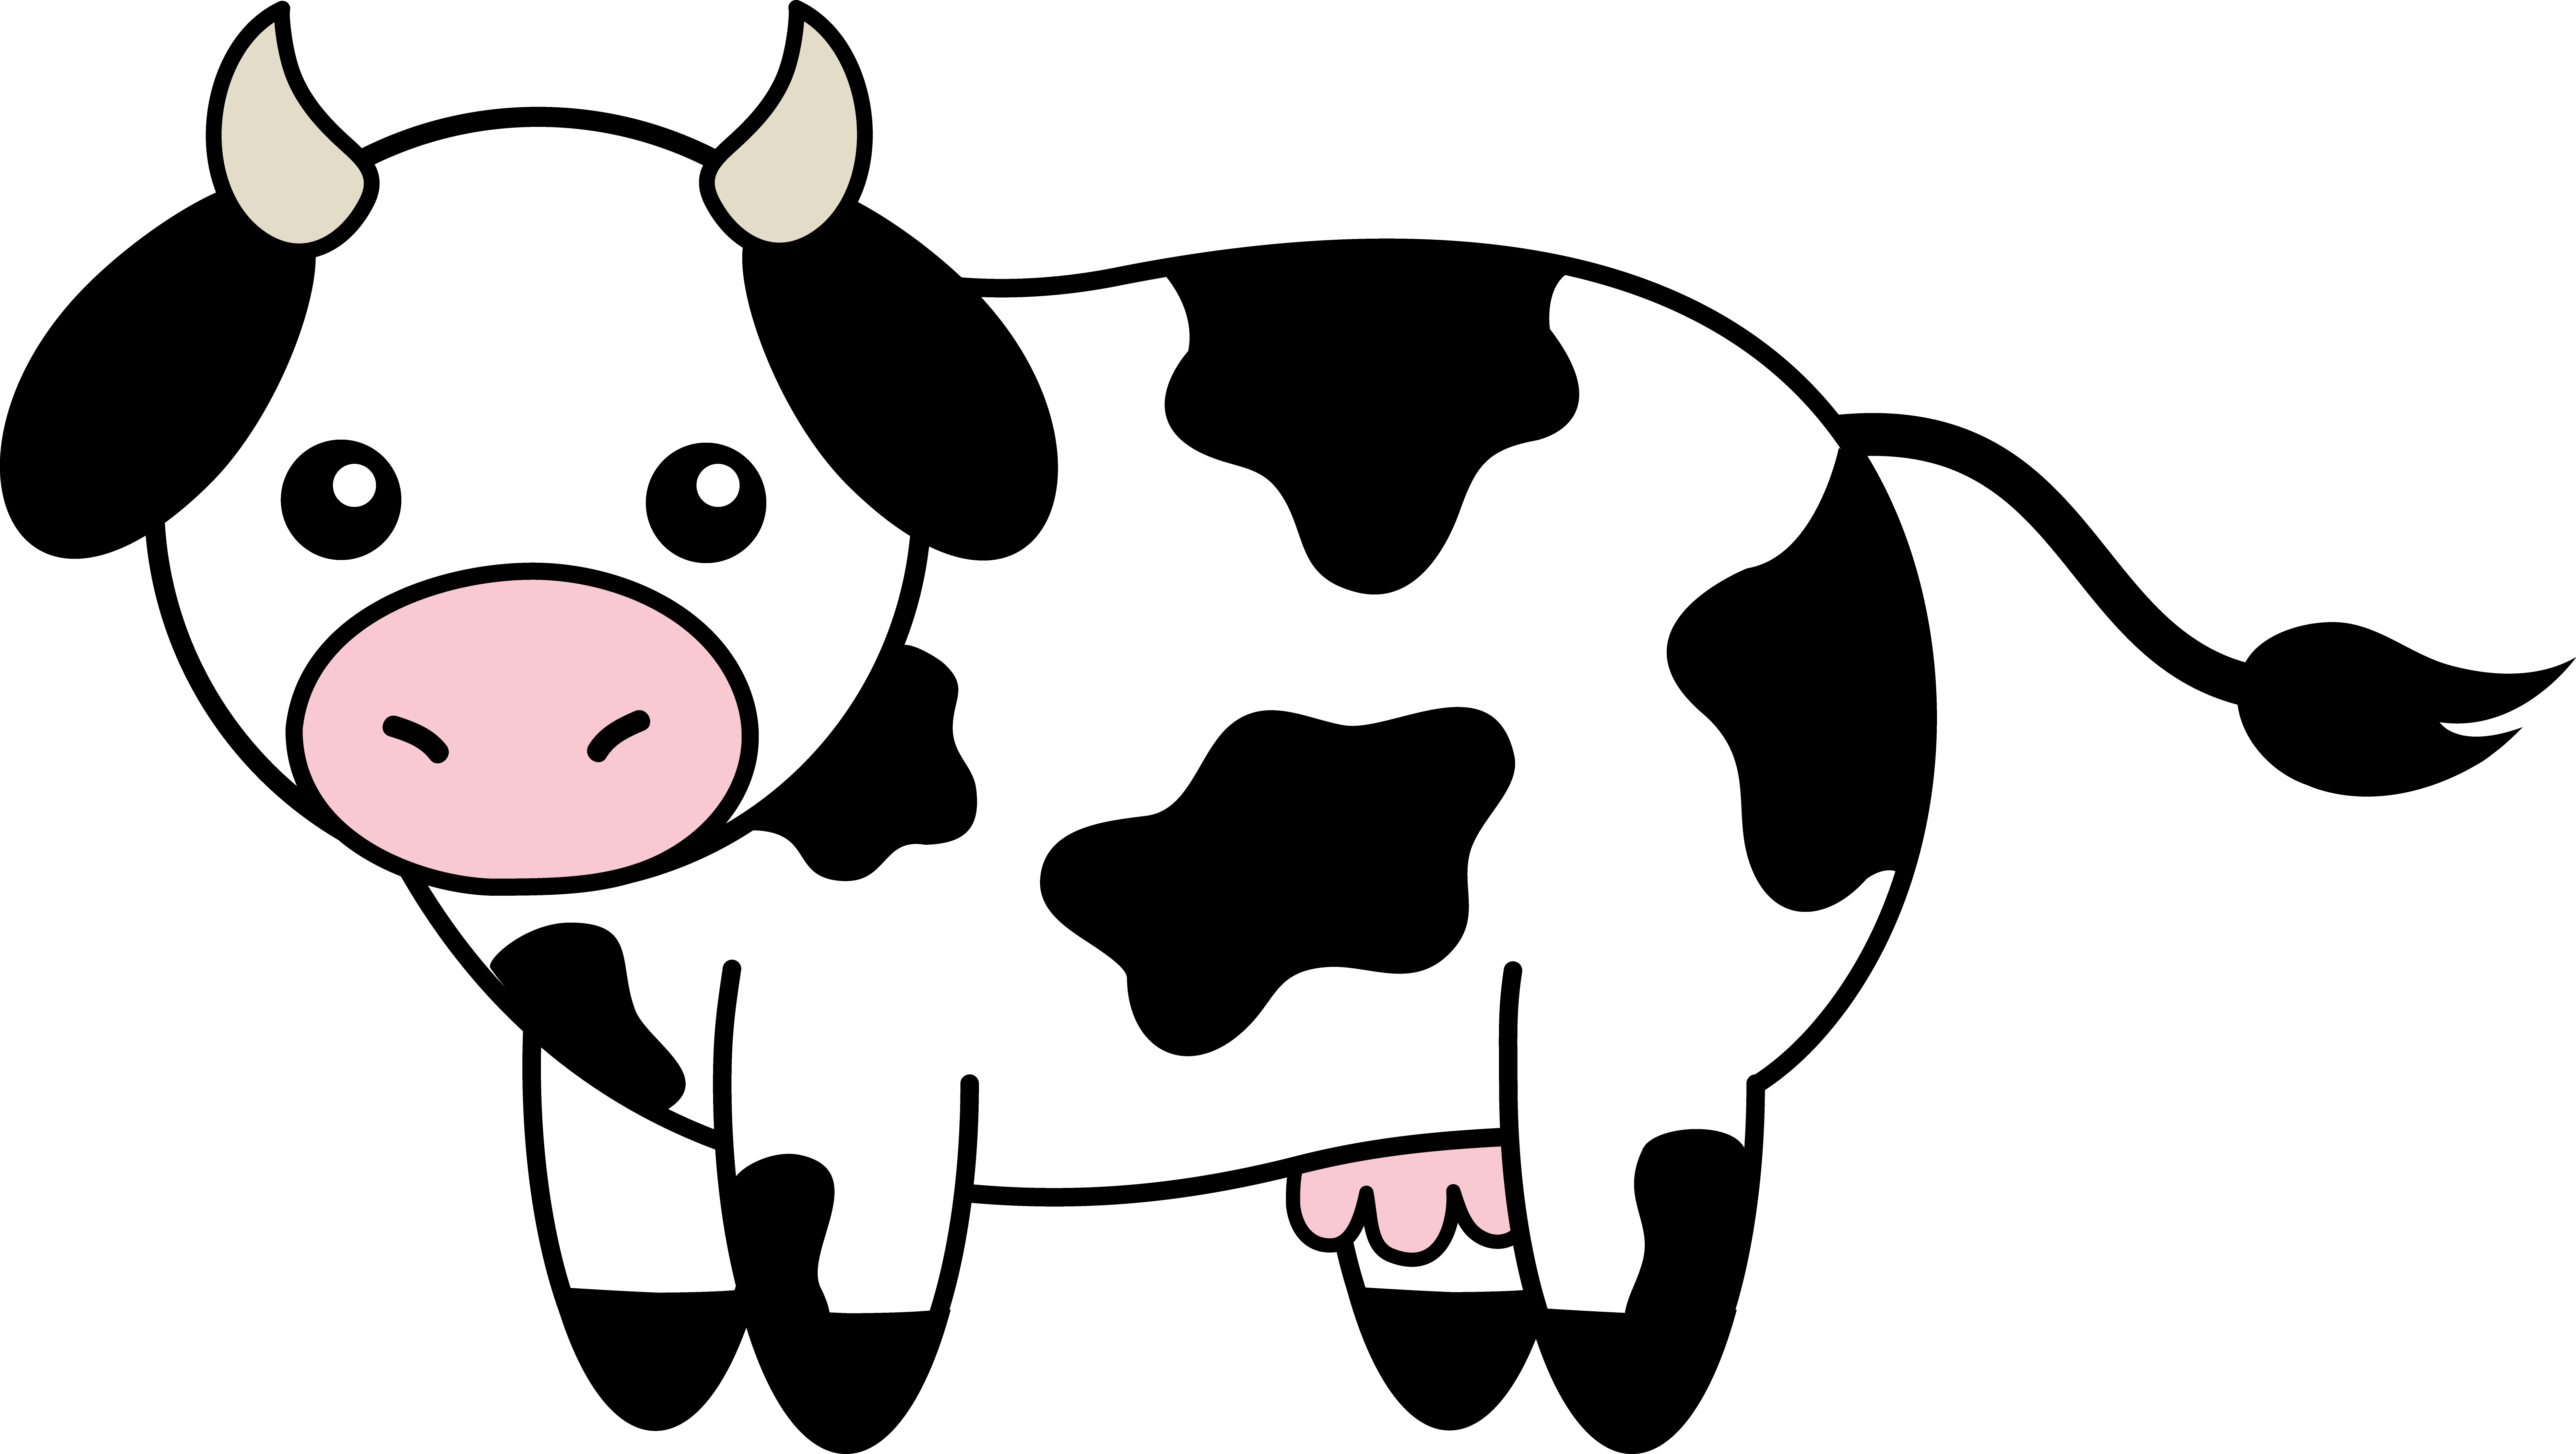 Cow Image Clipart 